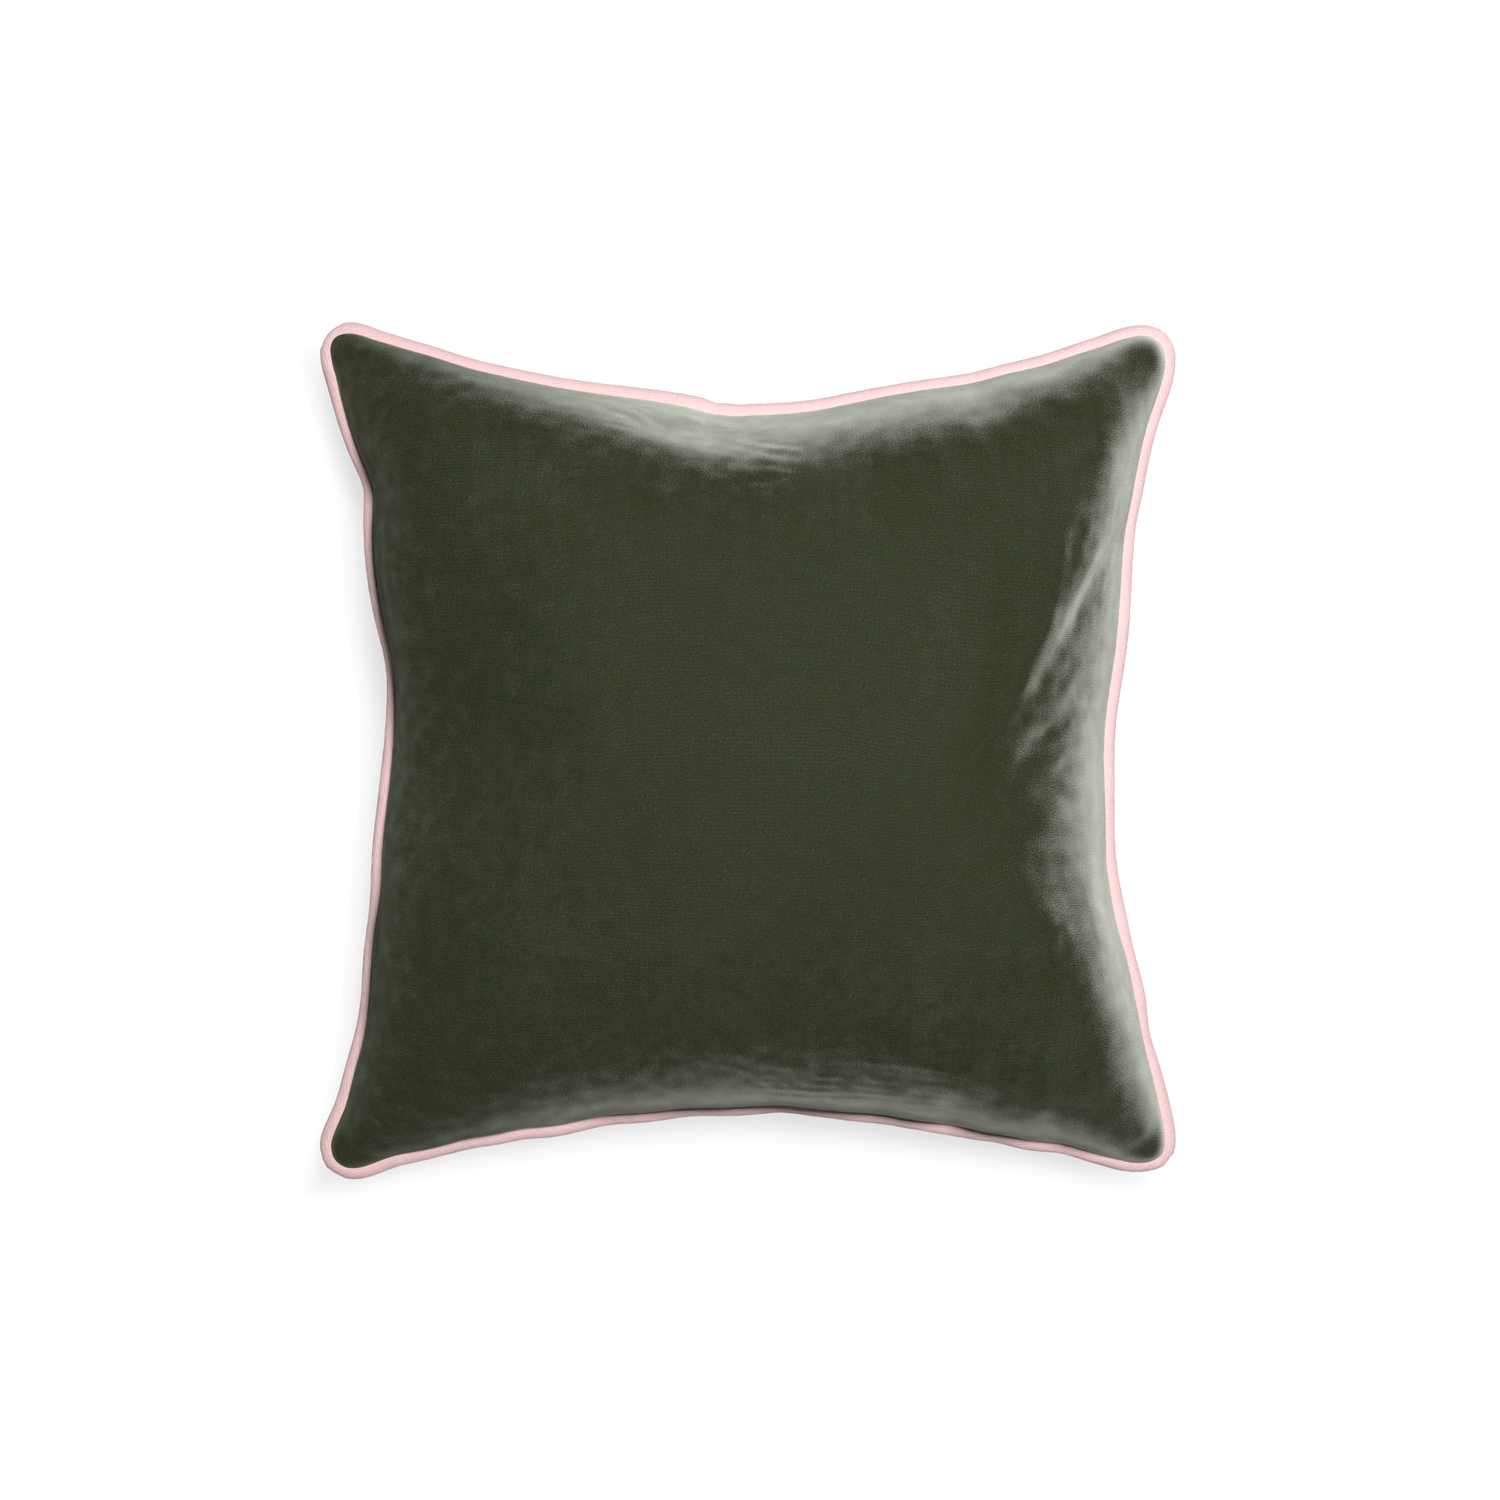 square fern green velvet pillow with light pink piping